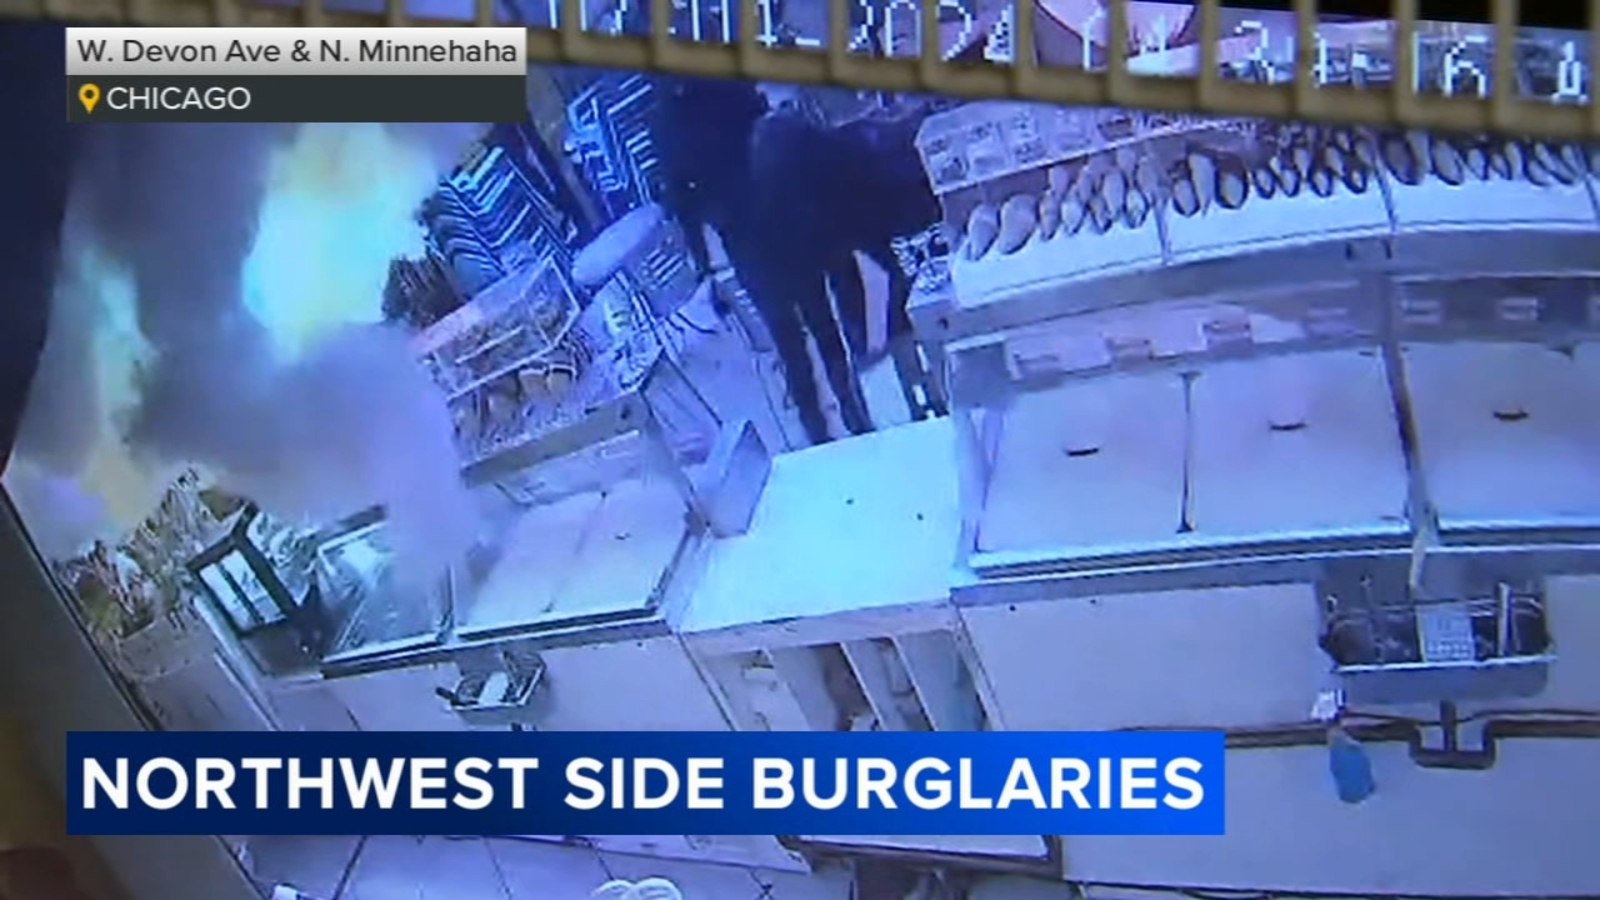 Chicago crime: Police investigate string of business burglaries on Northwest Side on July 4th [Video]